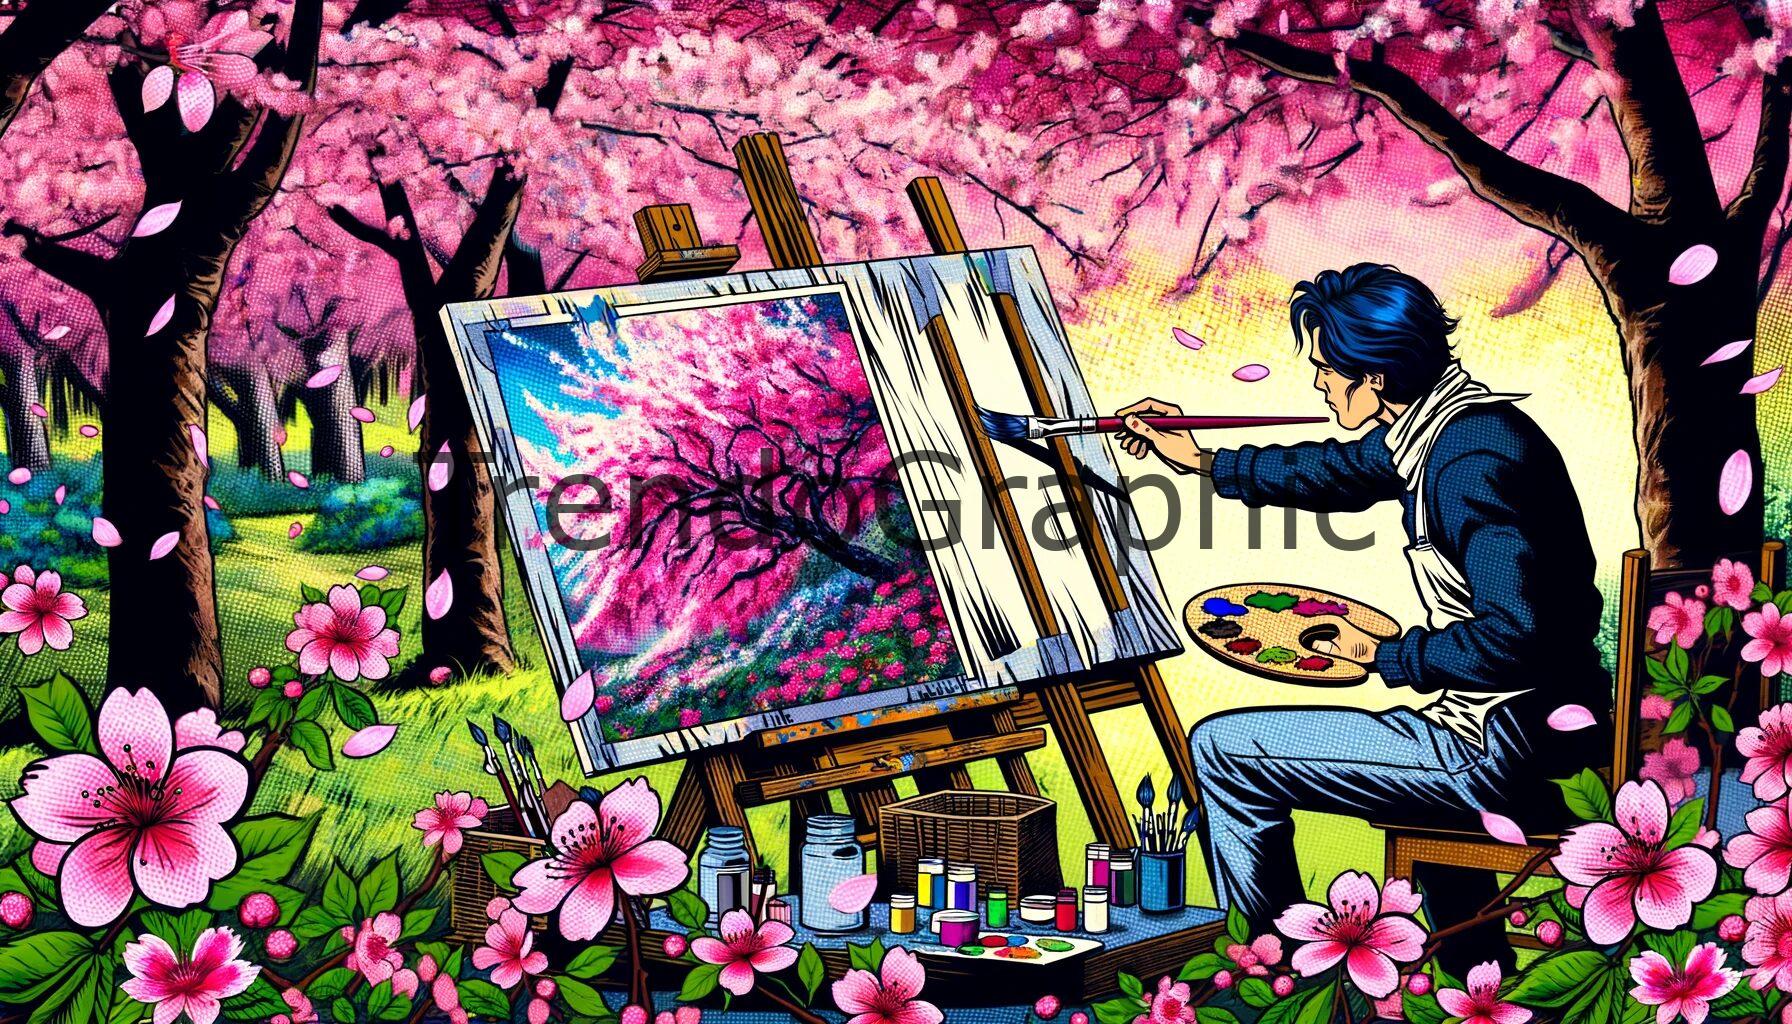 Capturing Cherry Blossoms: An Artist’s Canvas Comes Alive